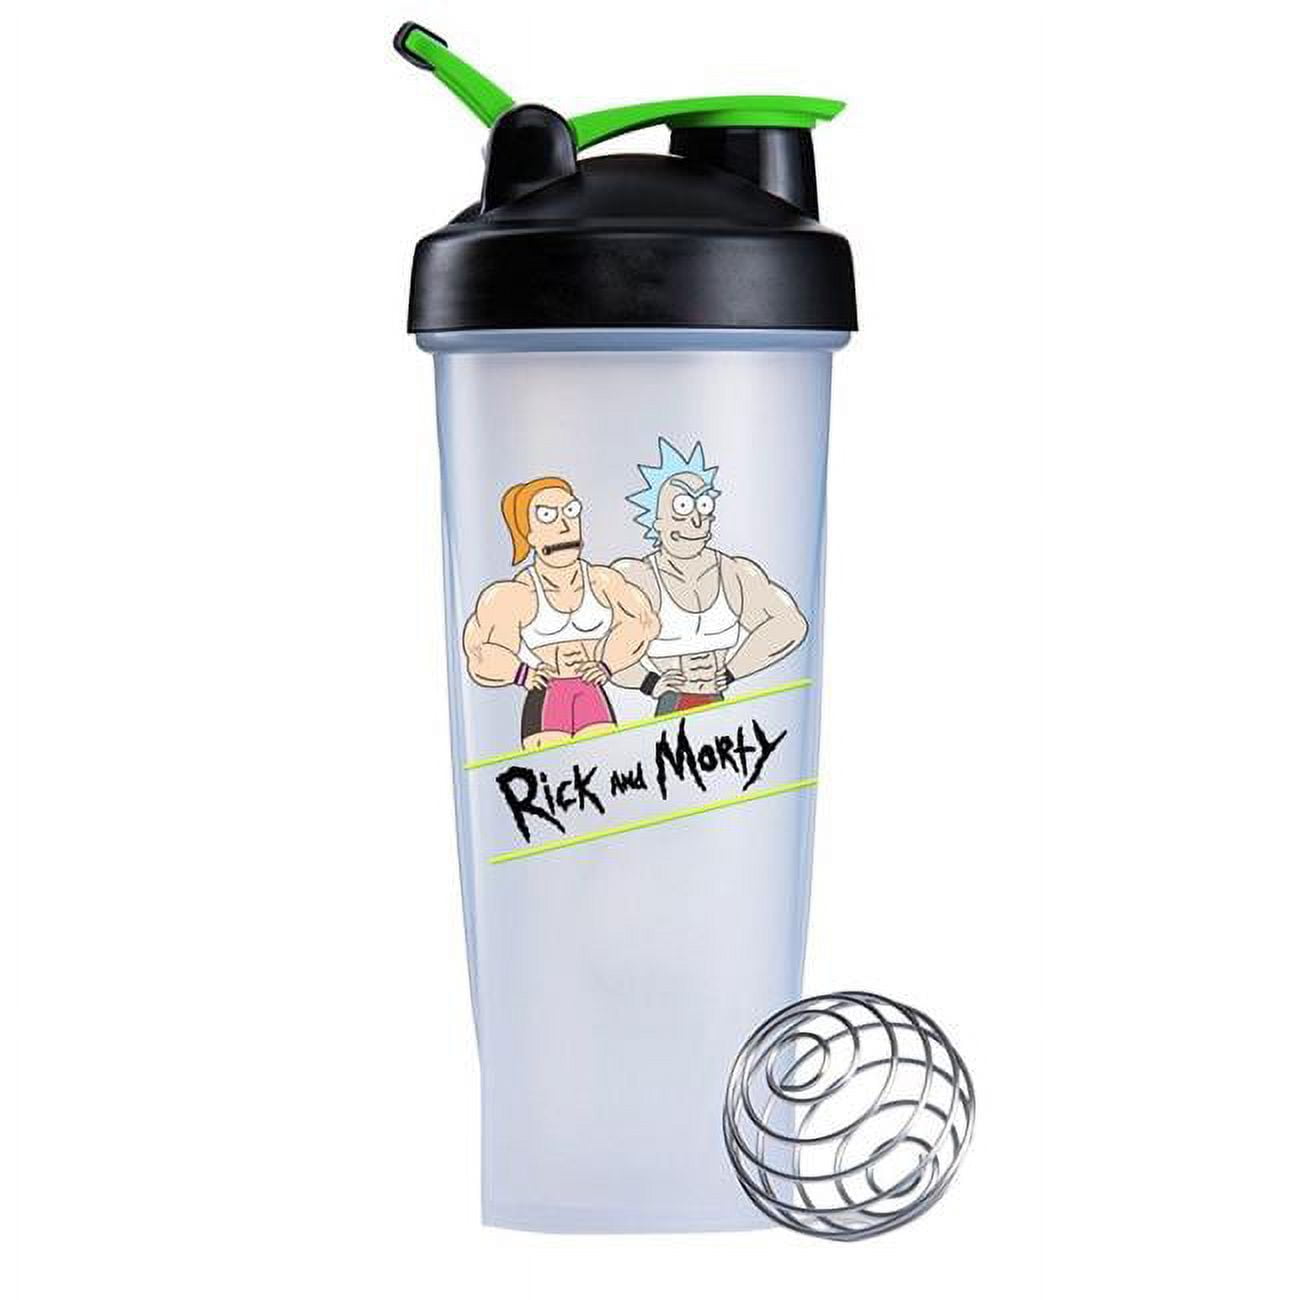 Rick And Morty Rick's Gym Shaker Bottle